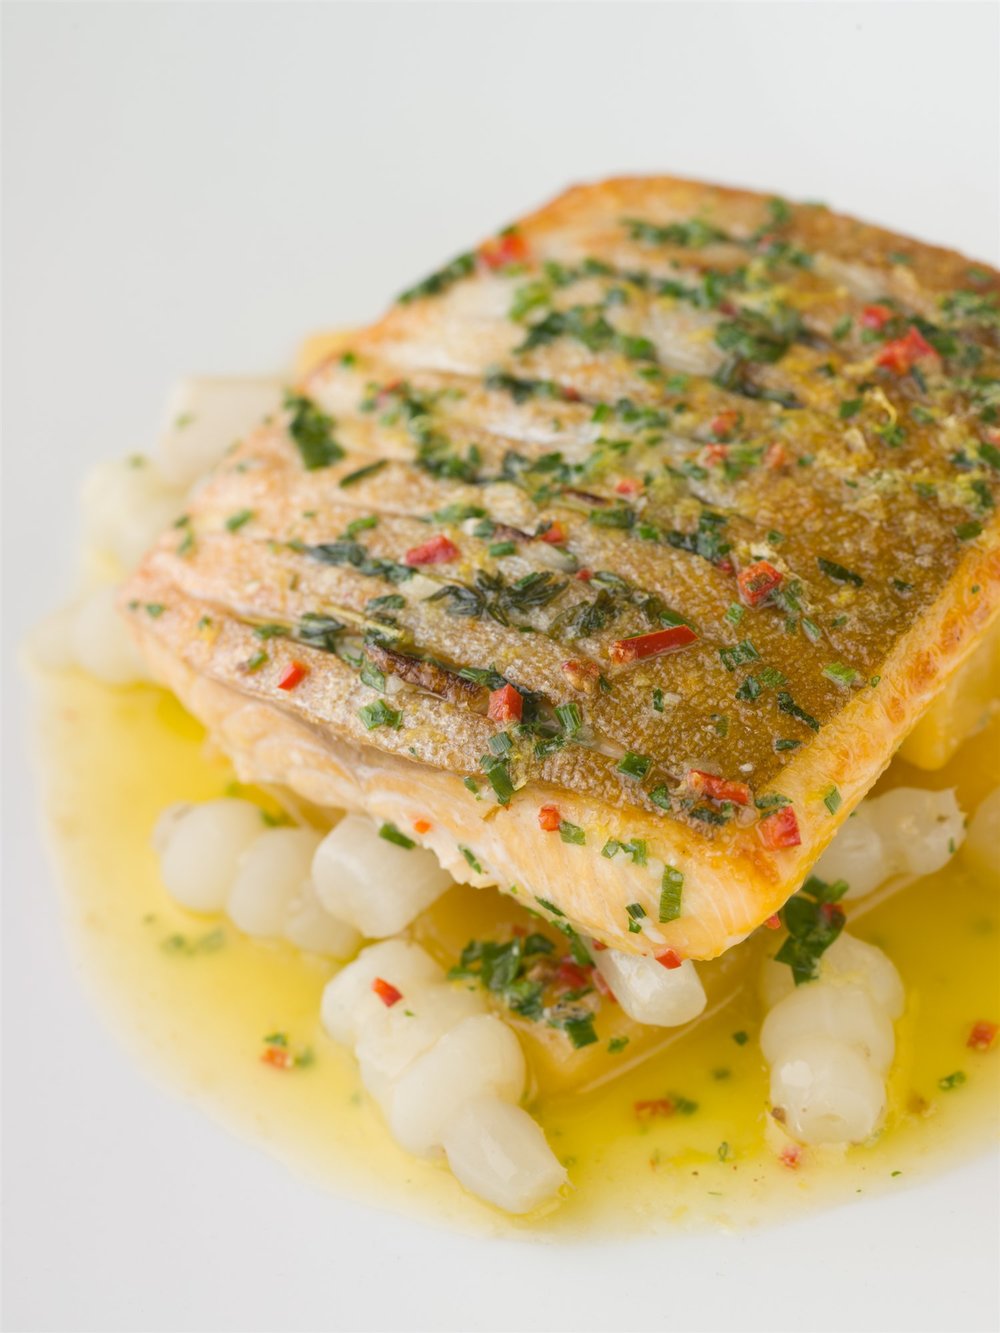  Arctic char over crosnes (Chinese artichokes) in lemon butter, at  Araxi .  John Sherlock | Courtesy Toptable Group  